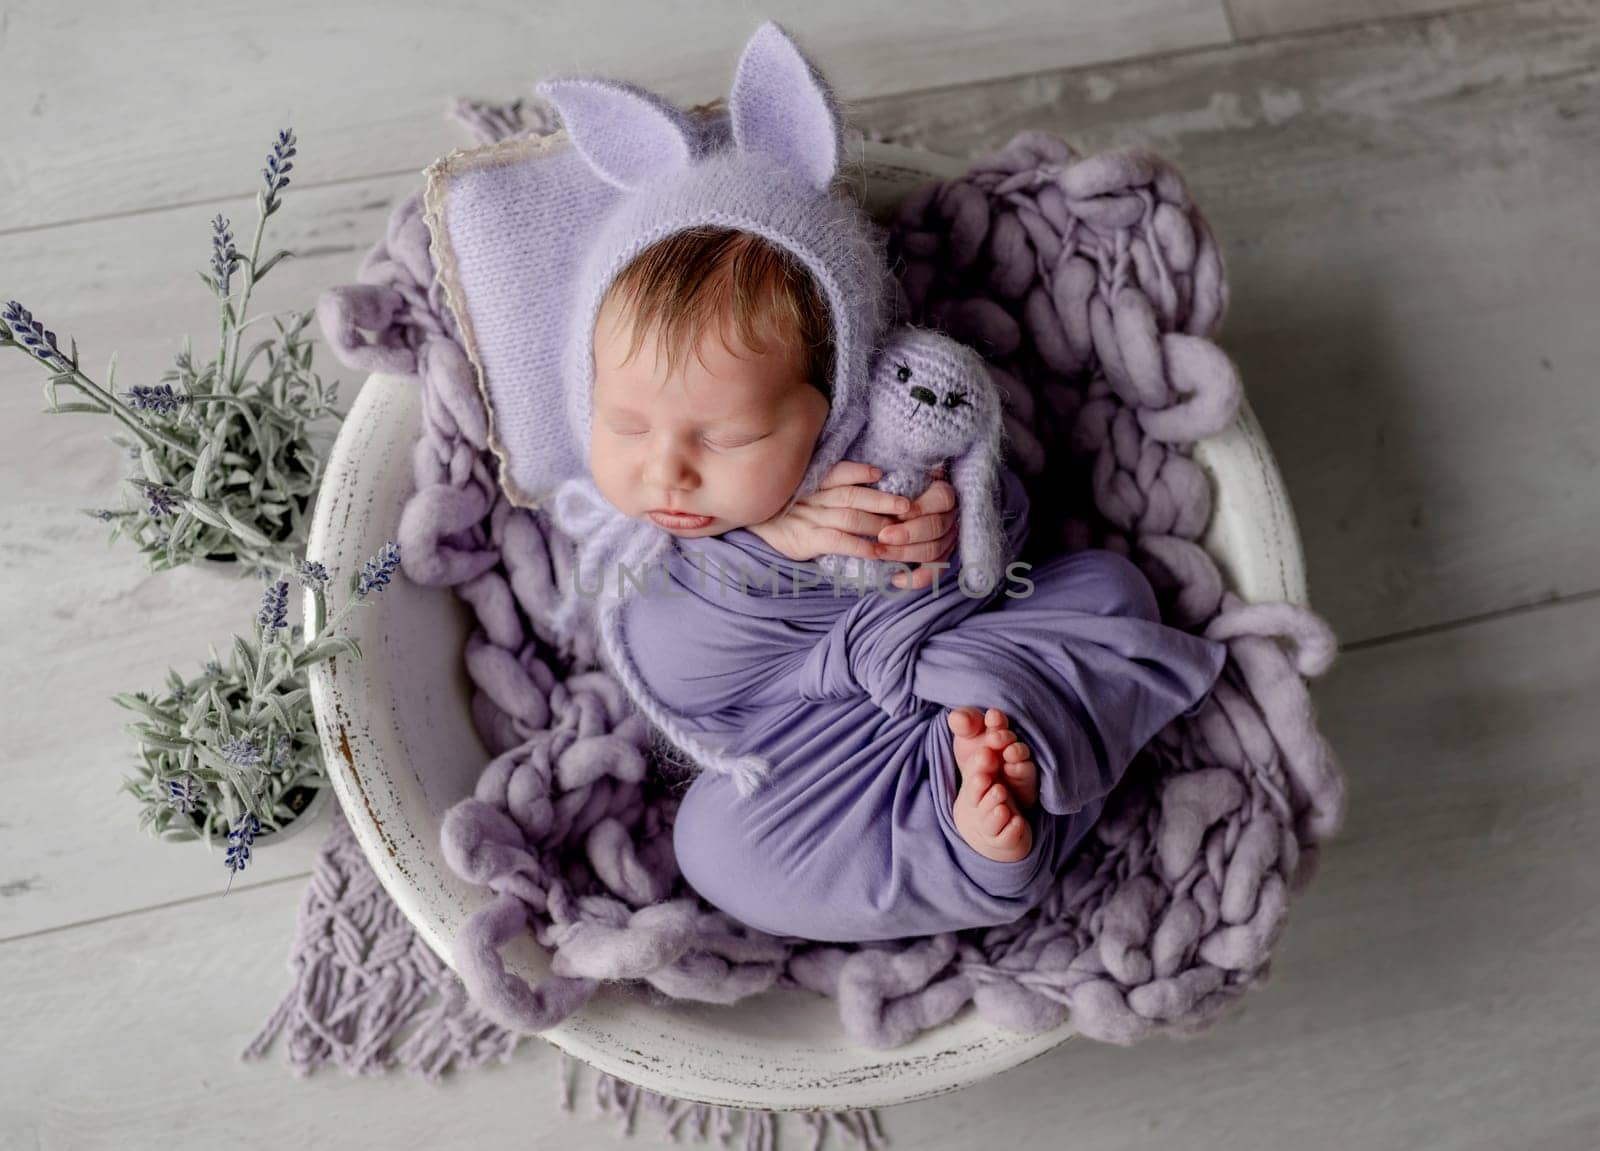 Newborn baby girl wearing knitted hat with rabbit ears holding bunny toy and looking at camera. Infant child kid lying swaddled in purple fabric studio portrait